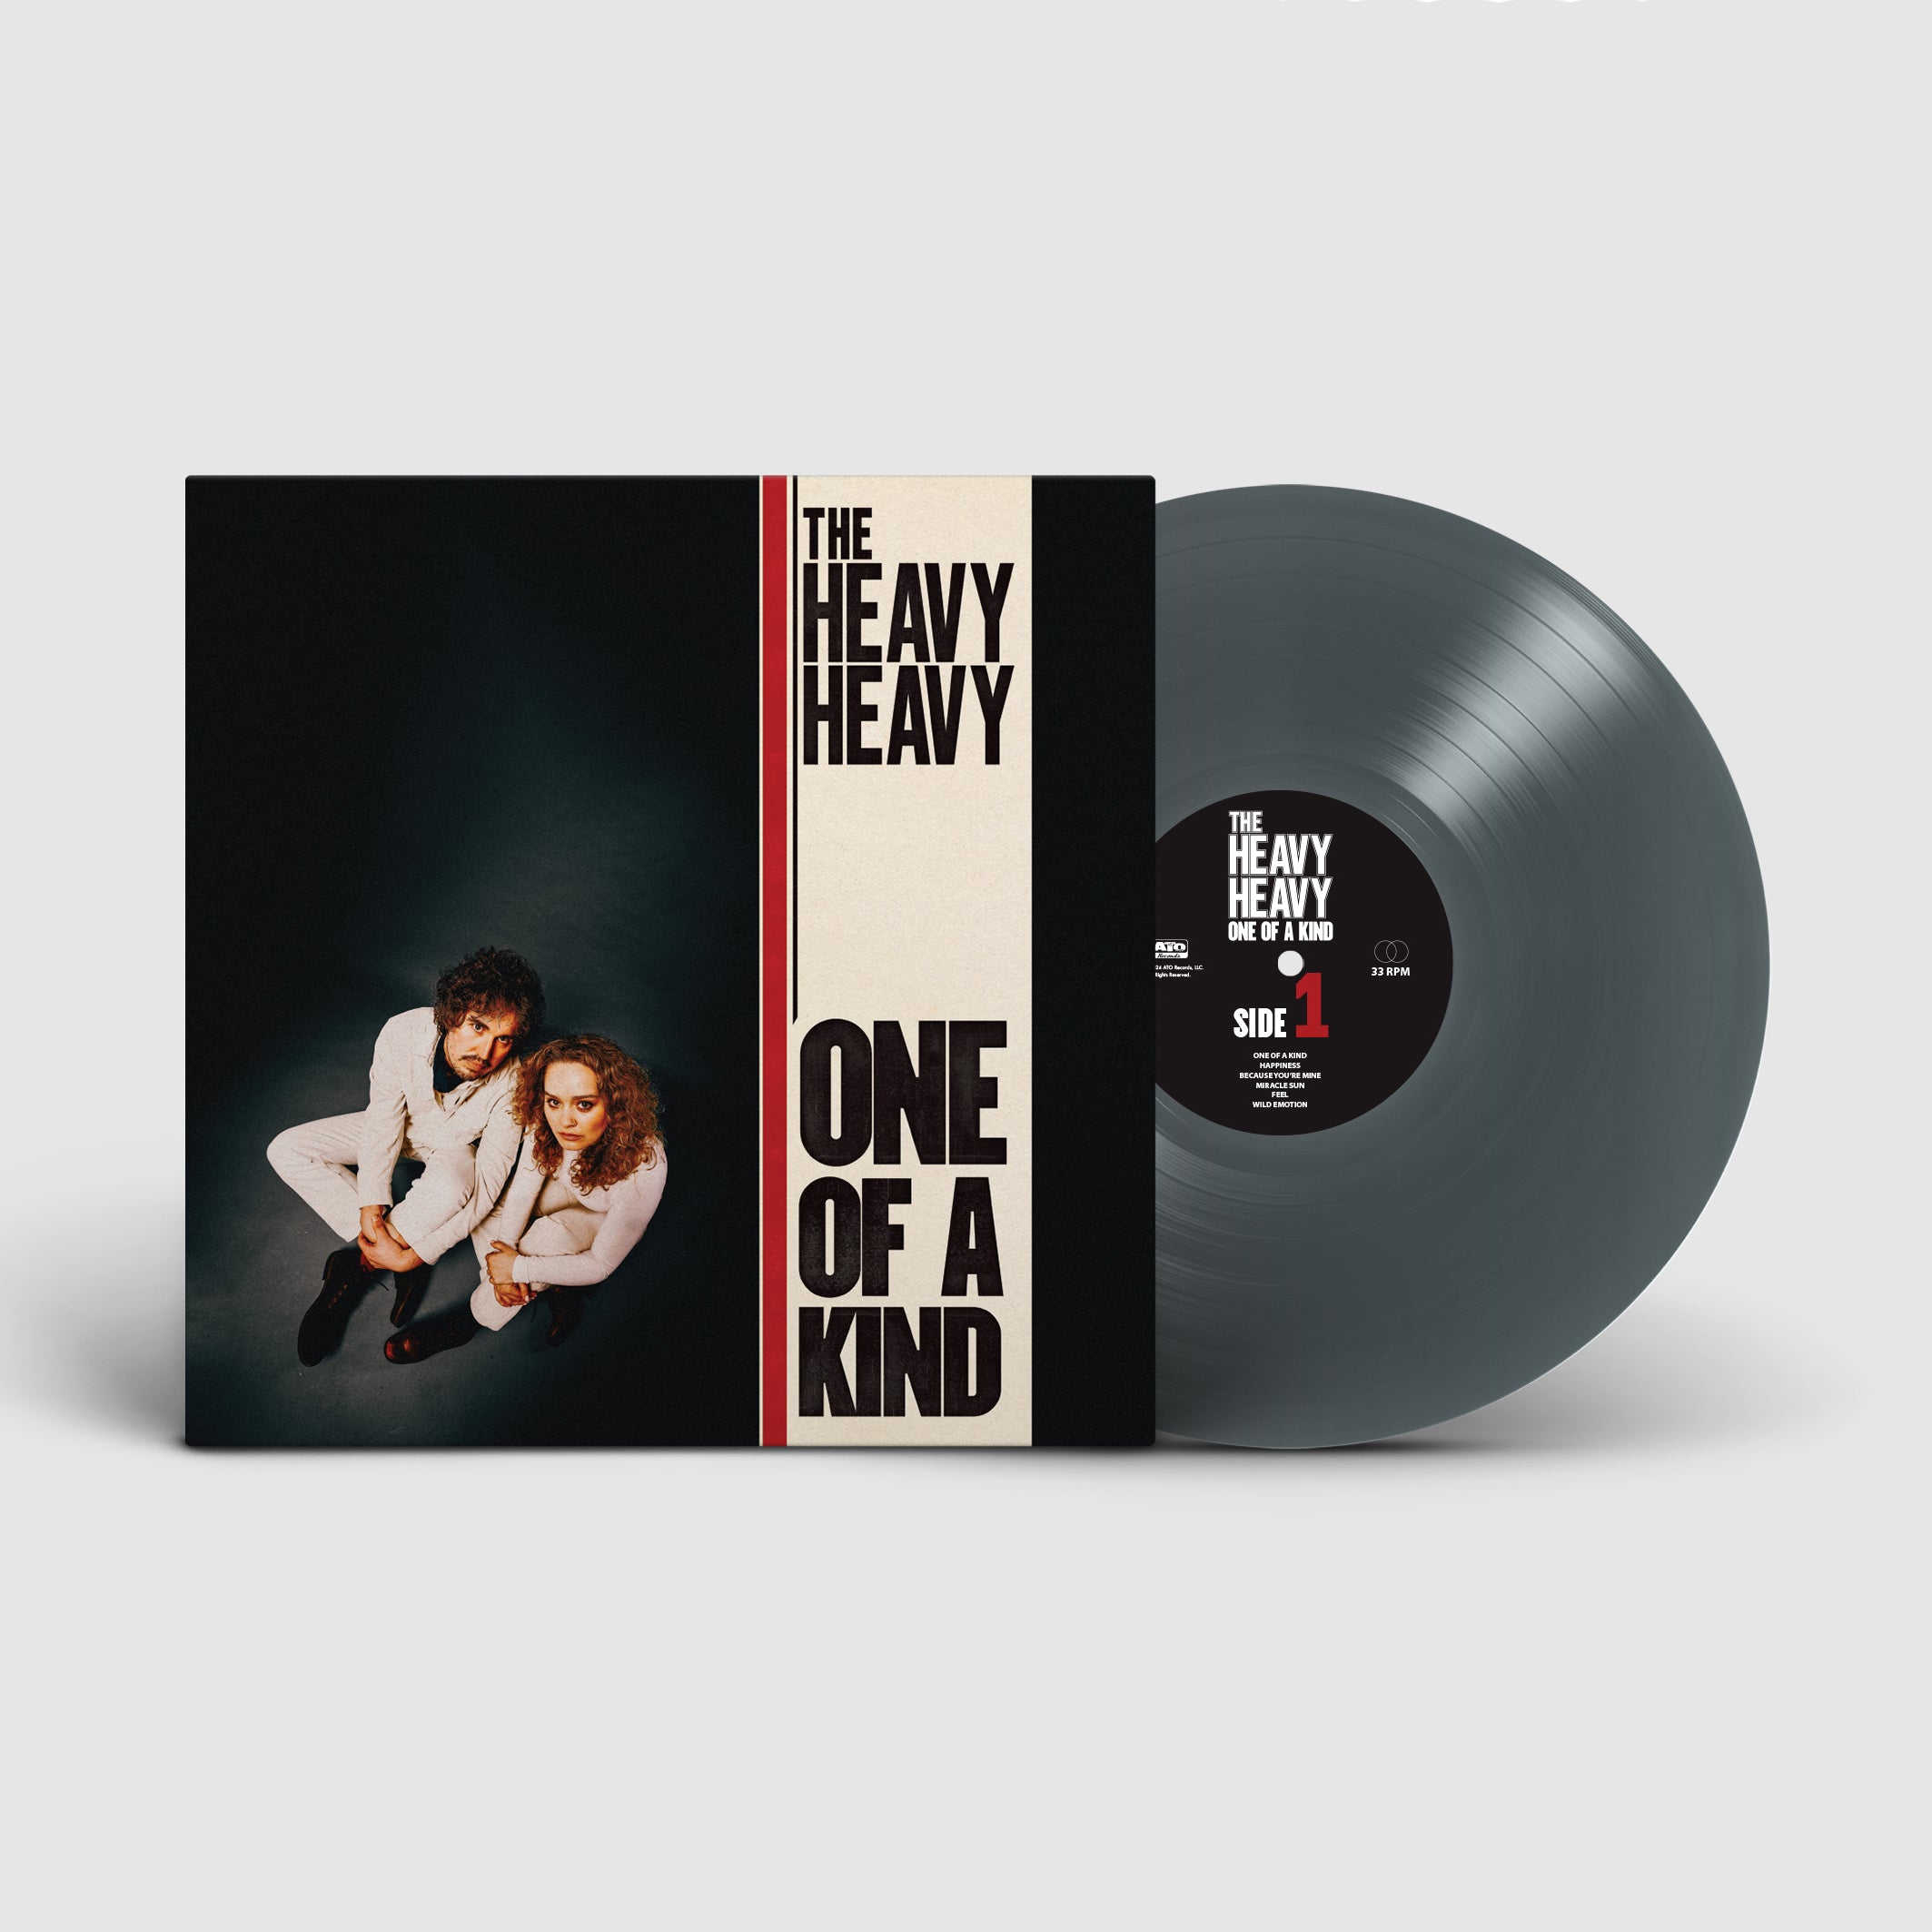 The Heavy Heavy - One of a Kind: Limited Silver Vinyl LP